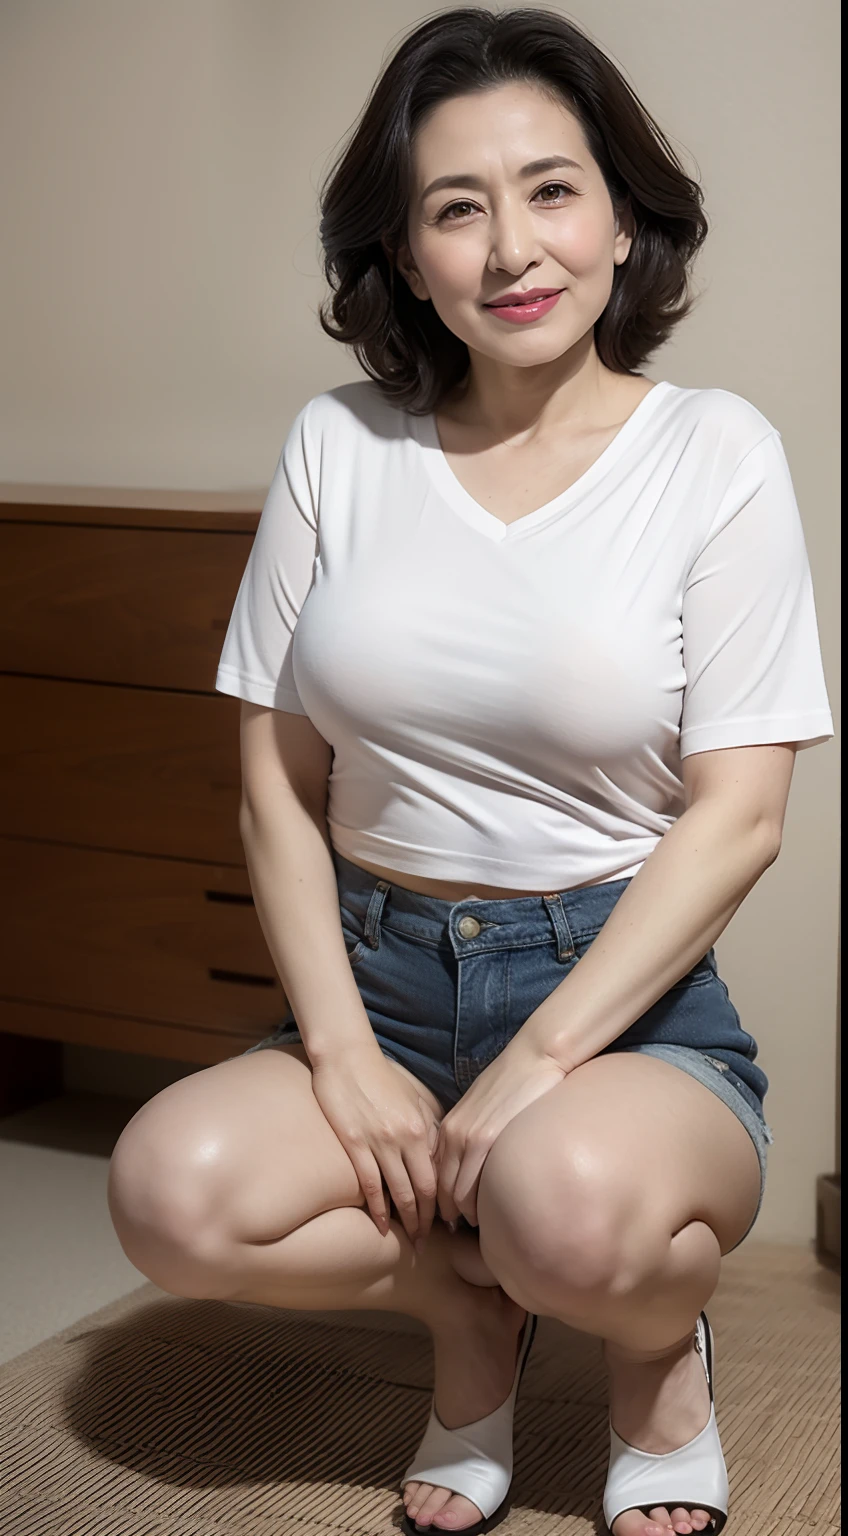 woman wearing a shirt and jeans, saggy breasts, huge breasts, big breasts!,  with a large breasts - SeaArt AI